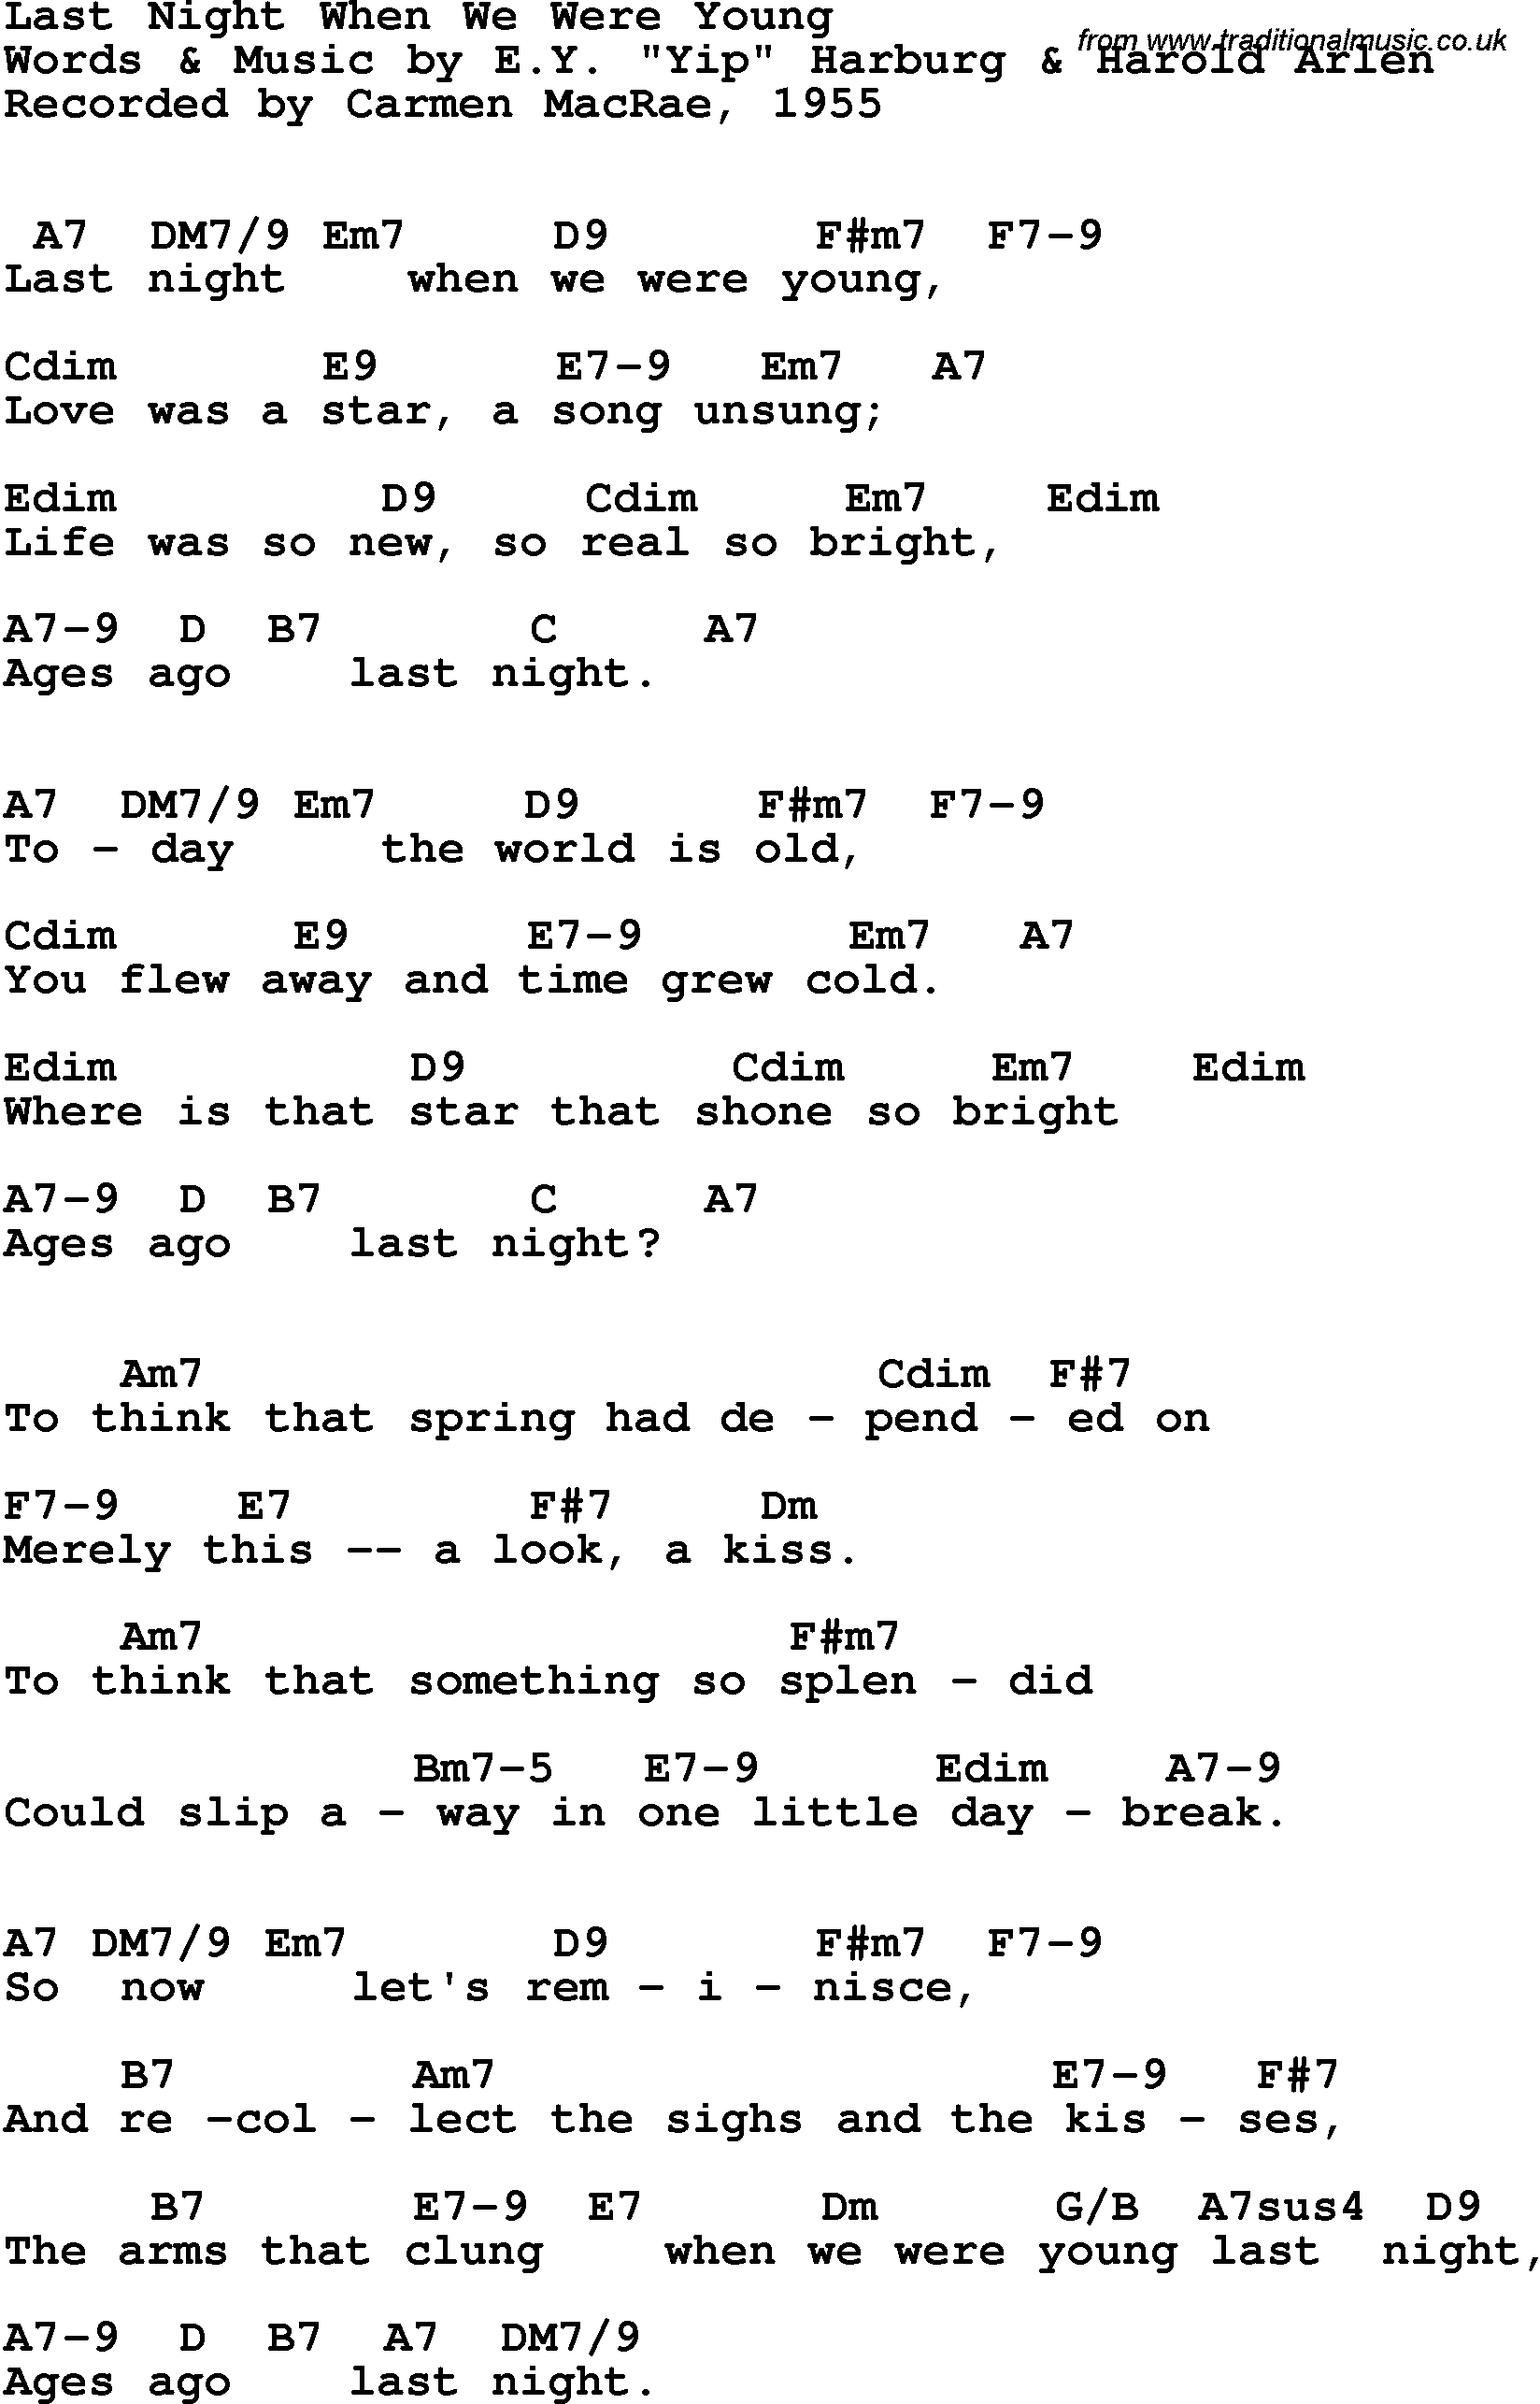 Song Lyrics with guitar chords for Last Night When We Were Young - Carmen Macrae, 1955